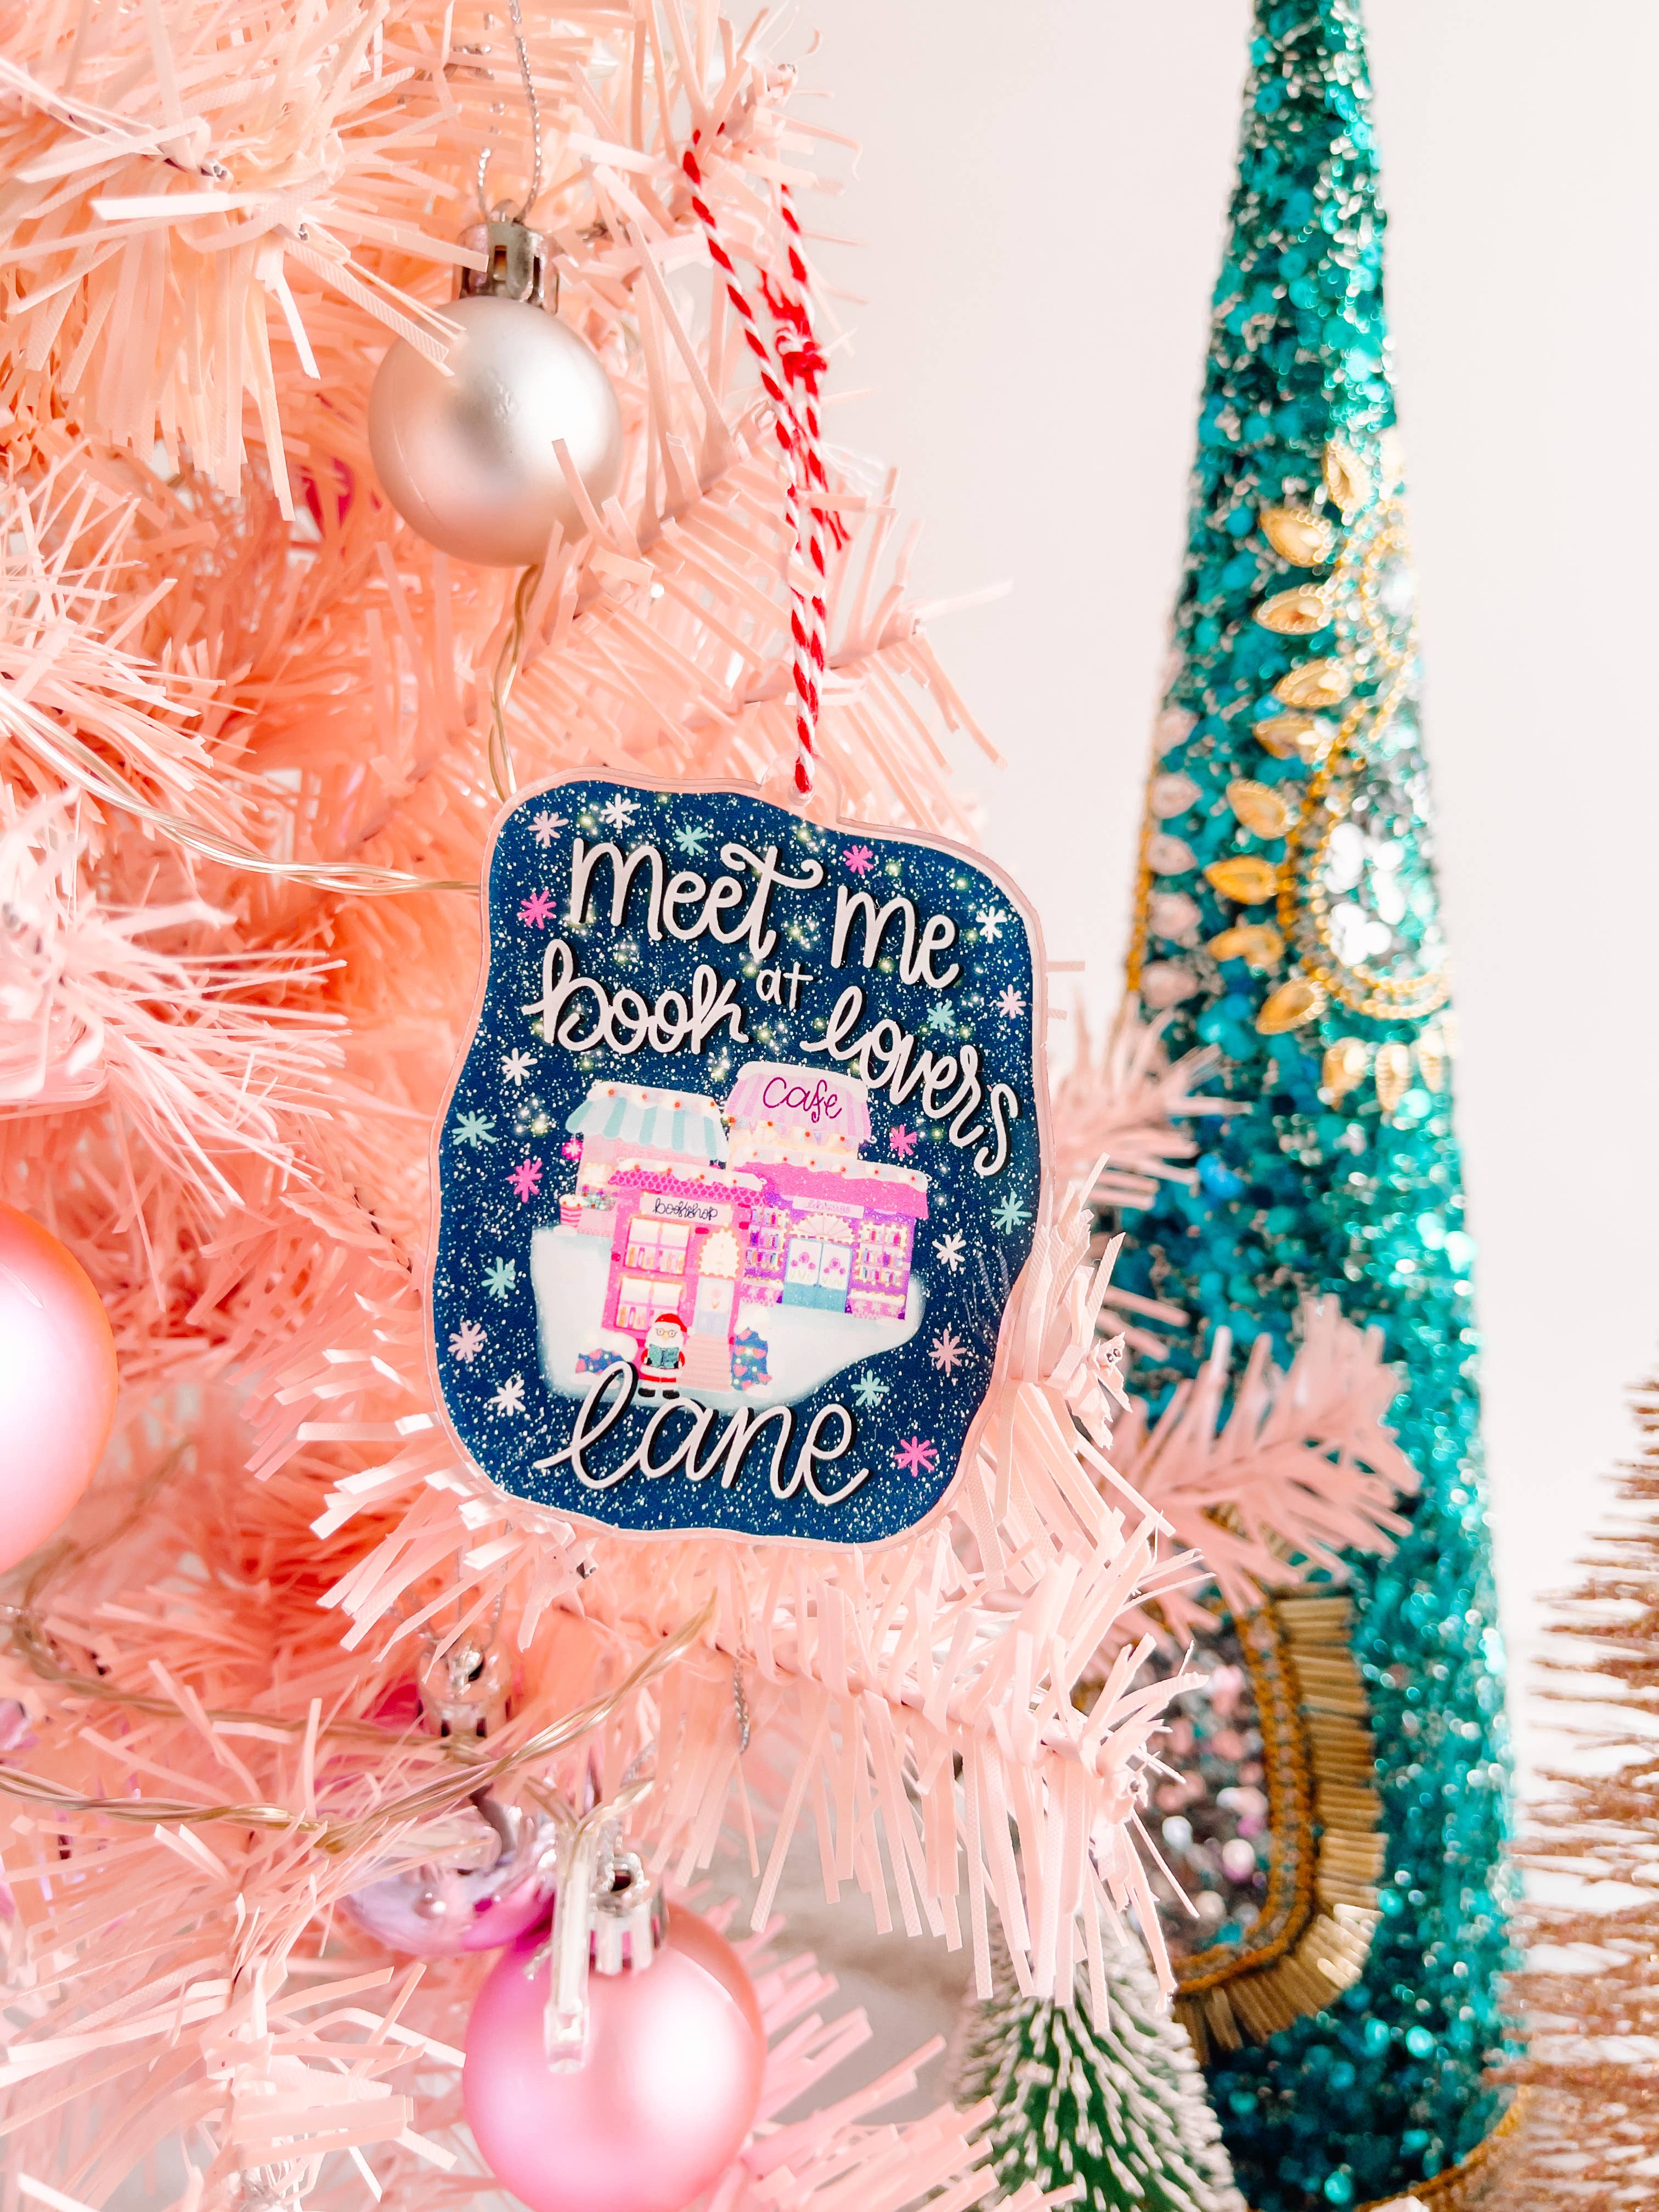 Meet Me at Book Lovers Lane Christmas Ornament